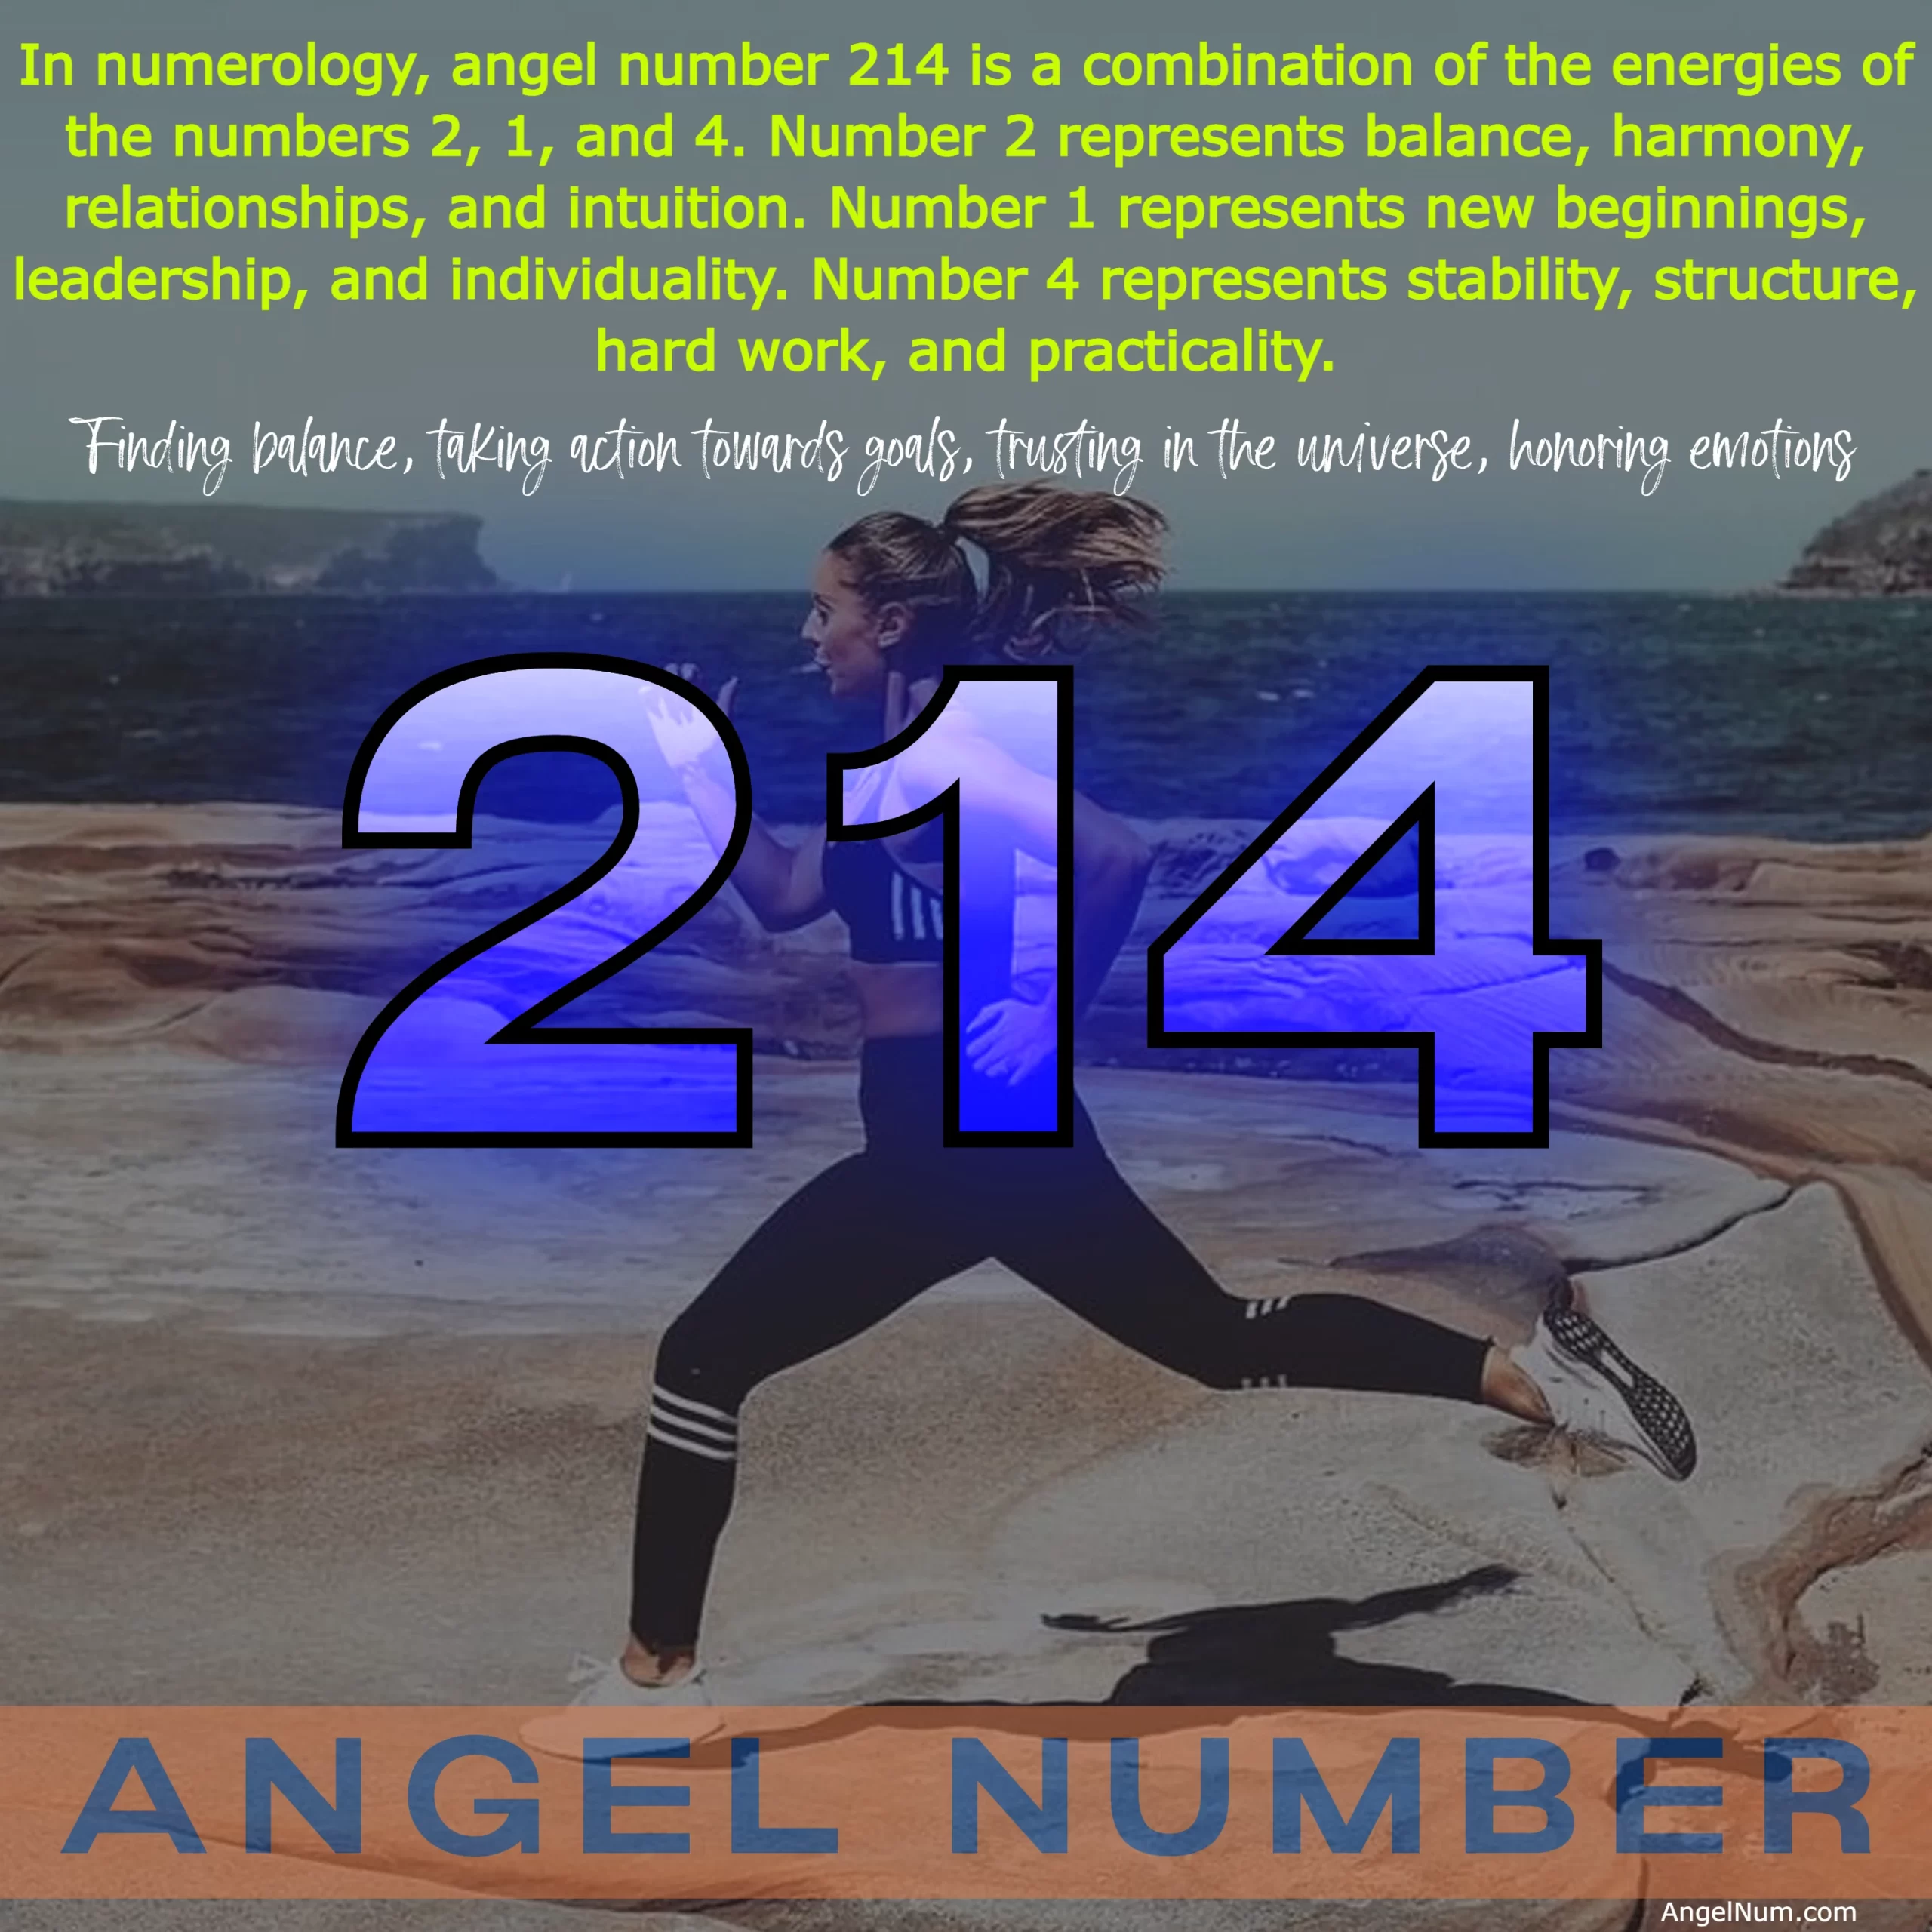 Angel Number 214: The Meaning and Significance